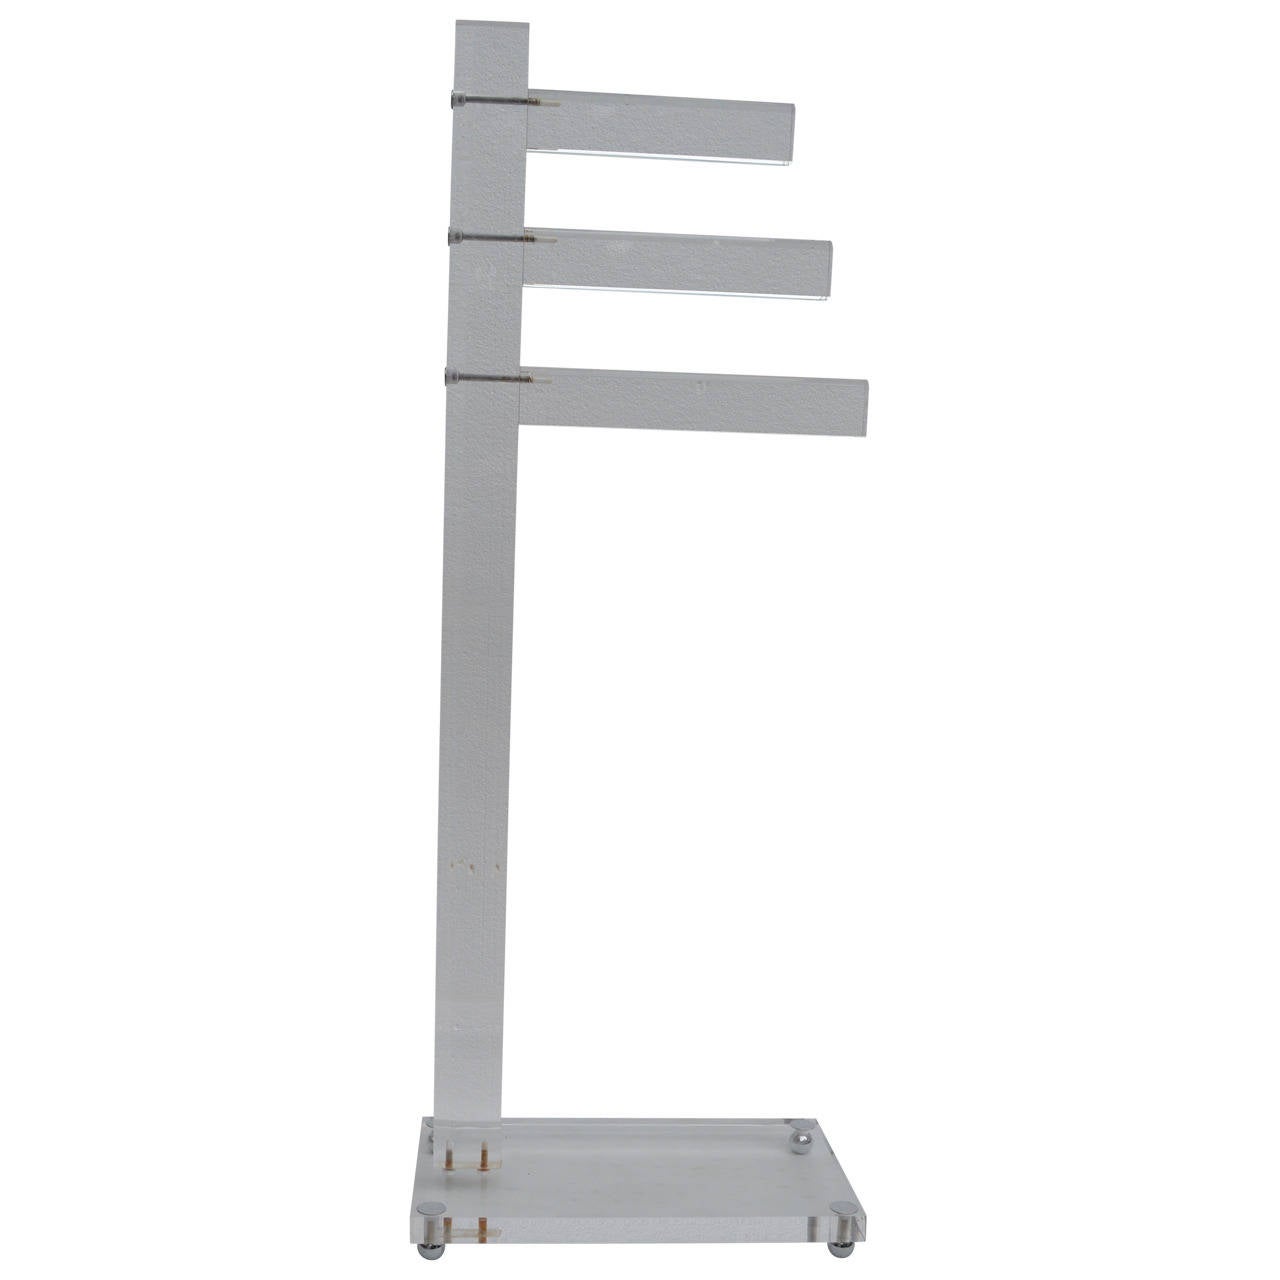 A three-bar, freestanding Mid-Century Lucite towel rack. Great design with versatility. Would also be serve well as a display piece for decorative textiles.